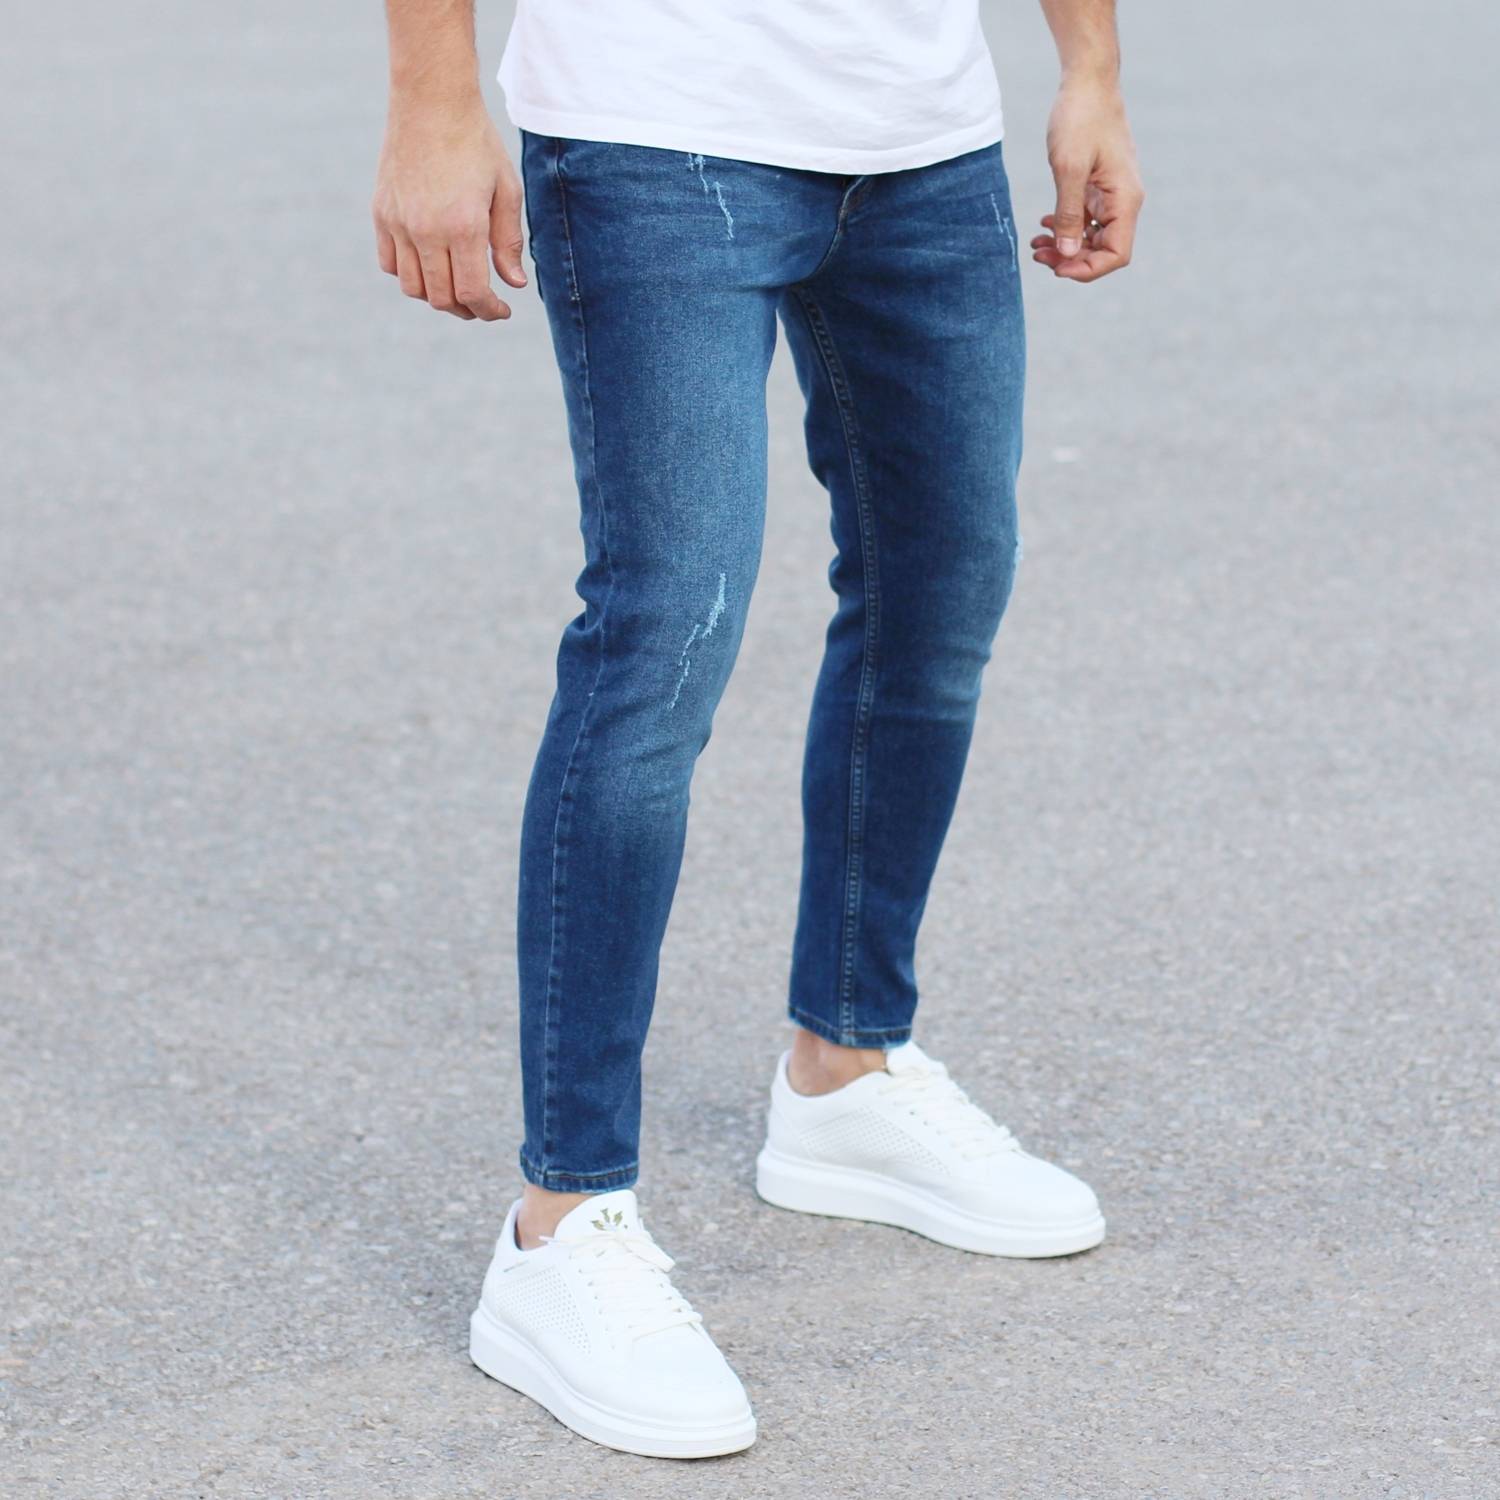 blue sneakers with jeans